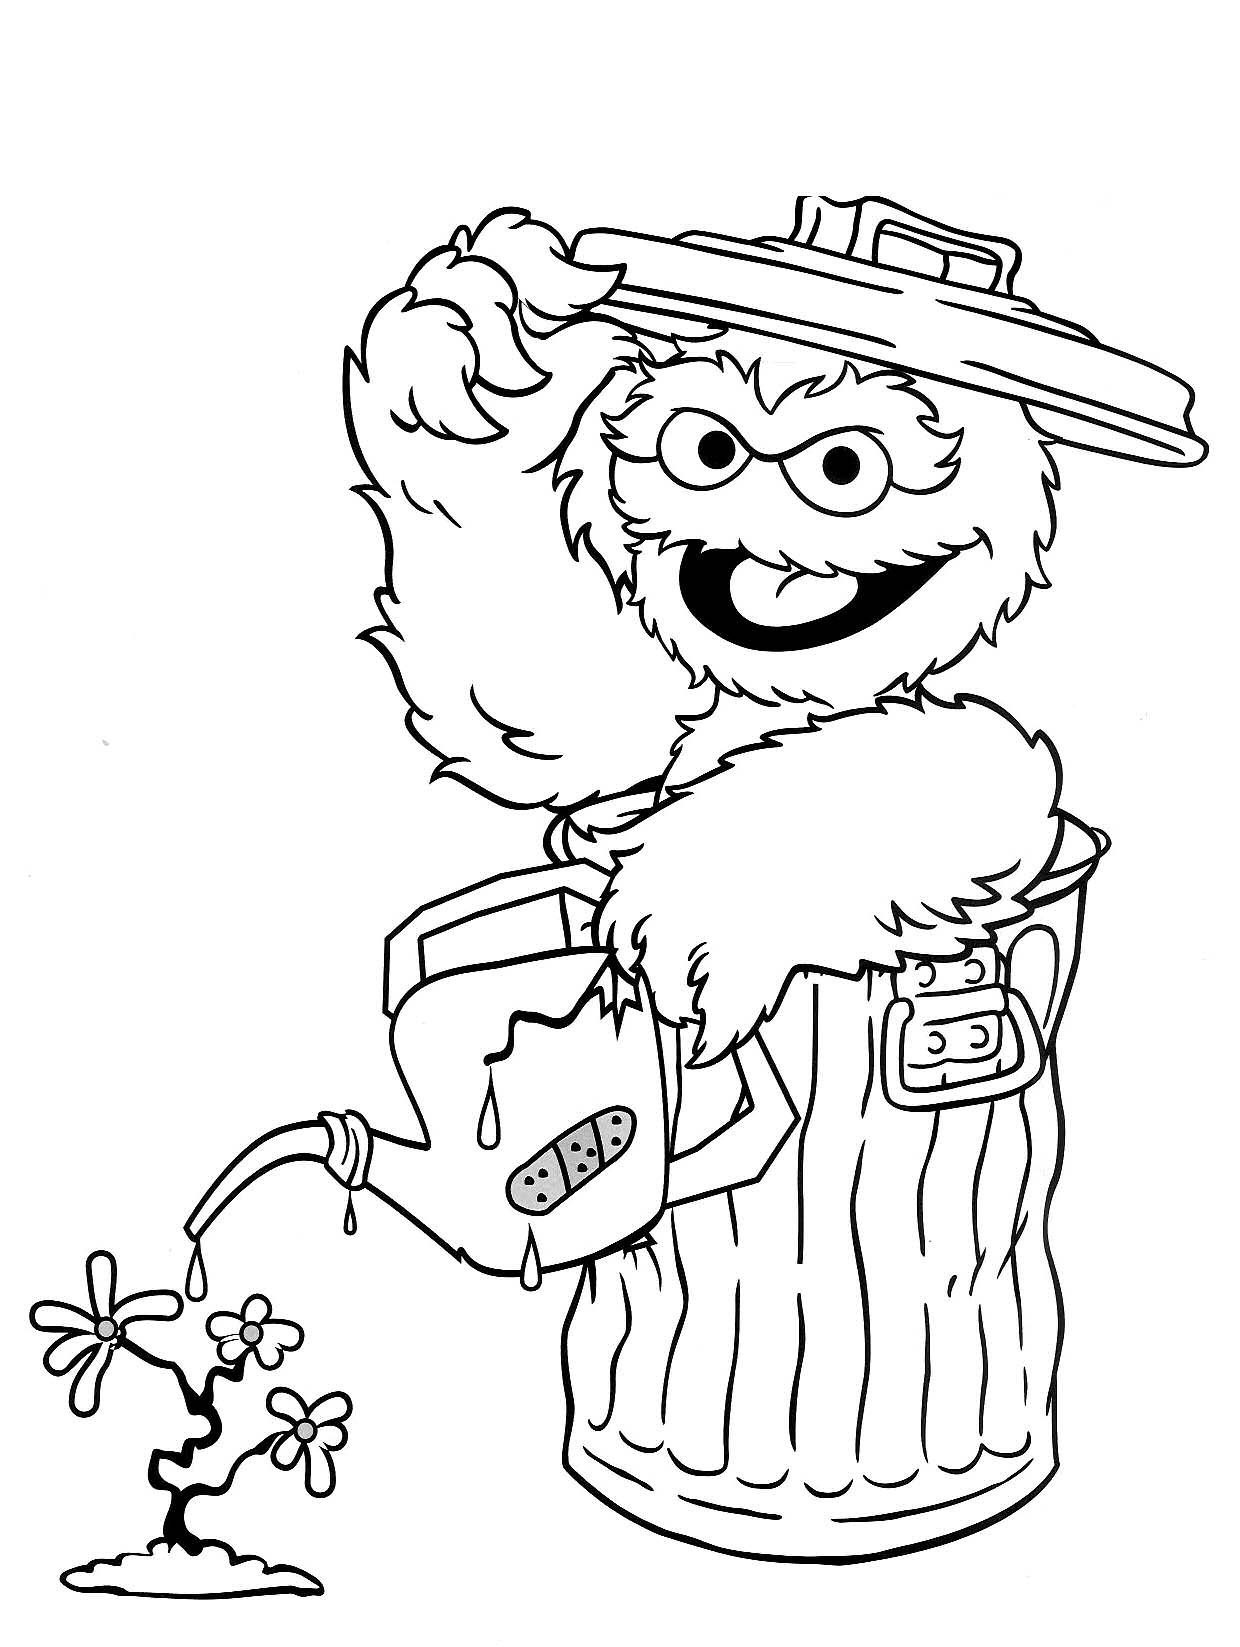 Free Printable Sesame Street Coloring Pages For Kids - Free Printable Coloring Pages Sesame Street Characters